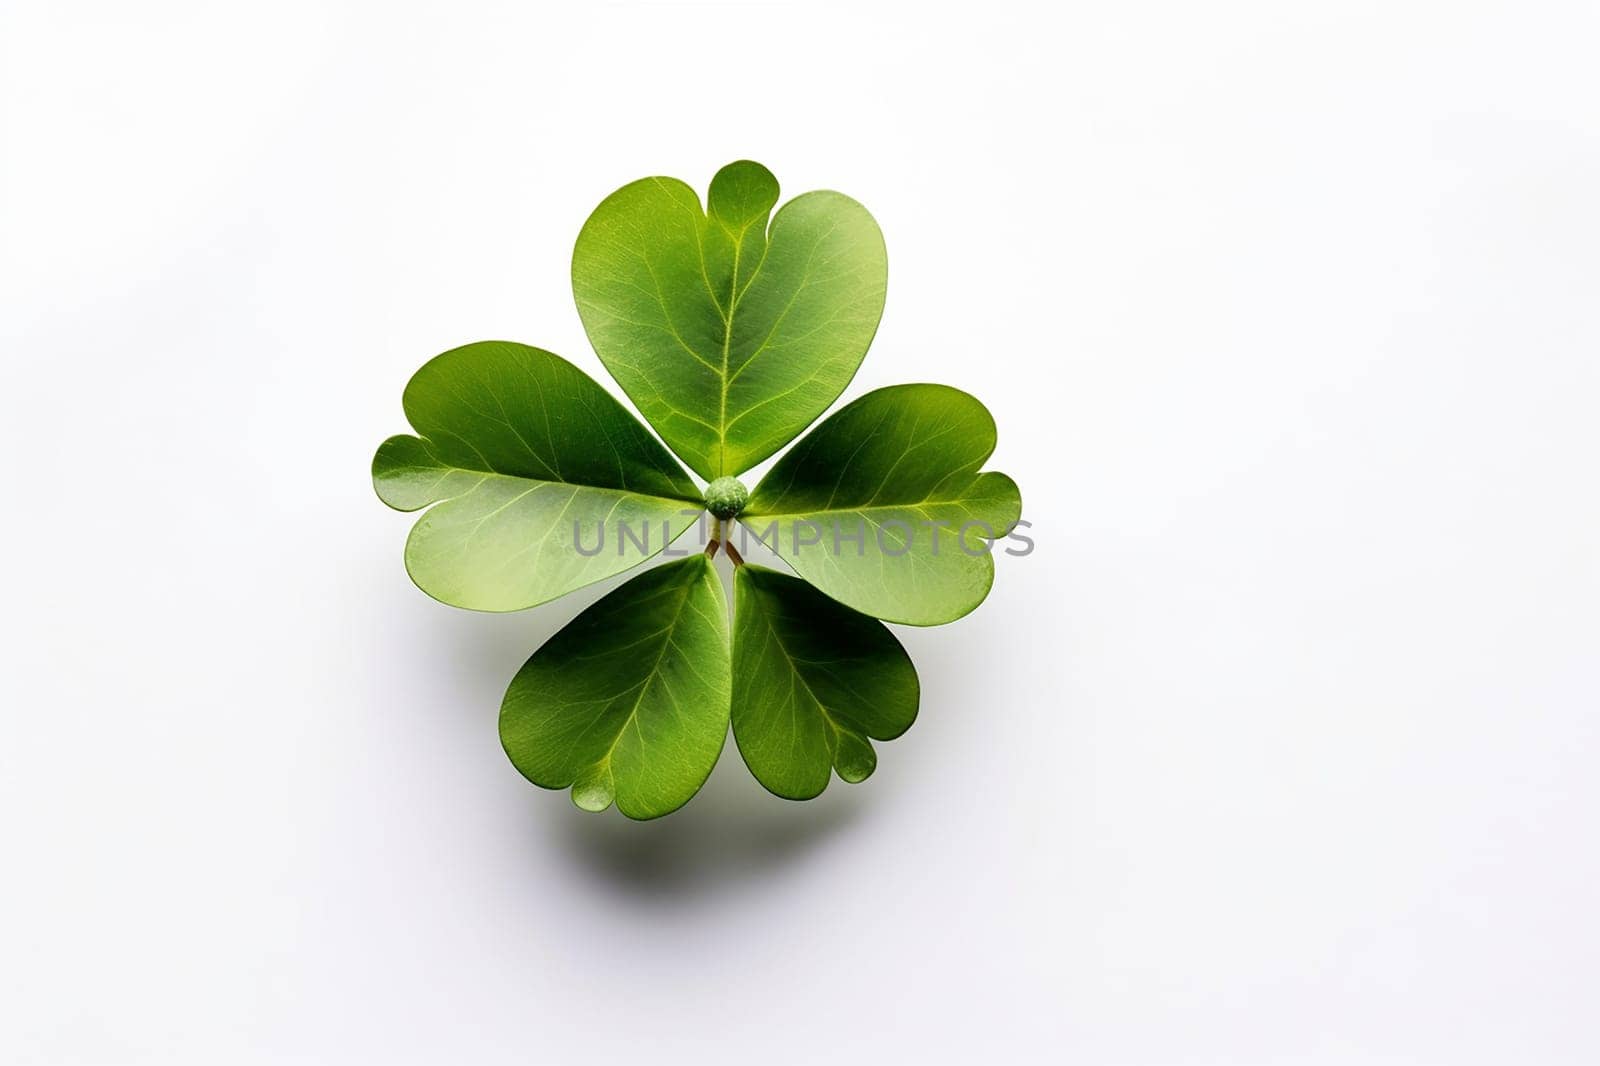 A photograph of a green clover with four leaves isolated on a white background.